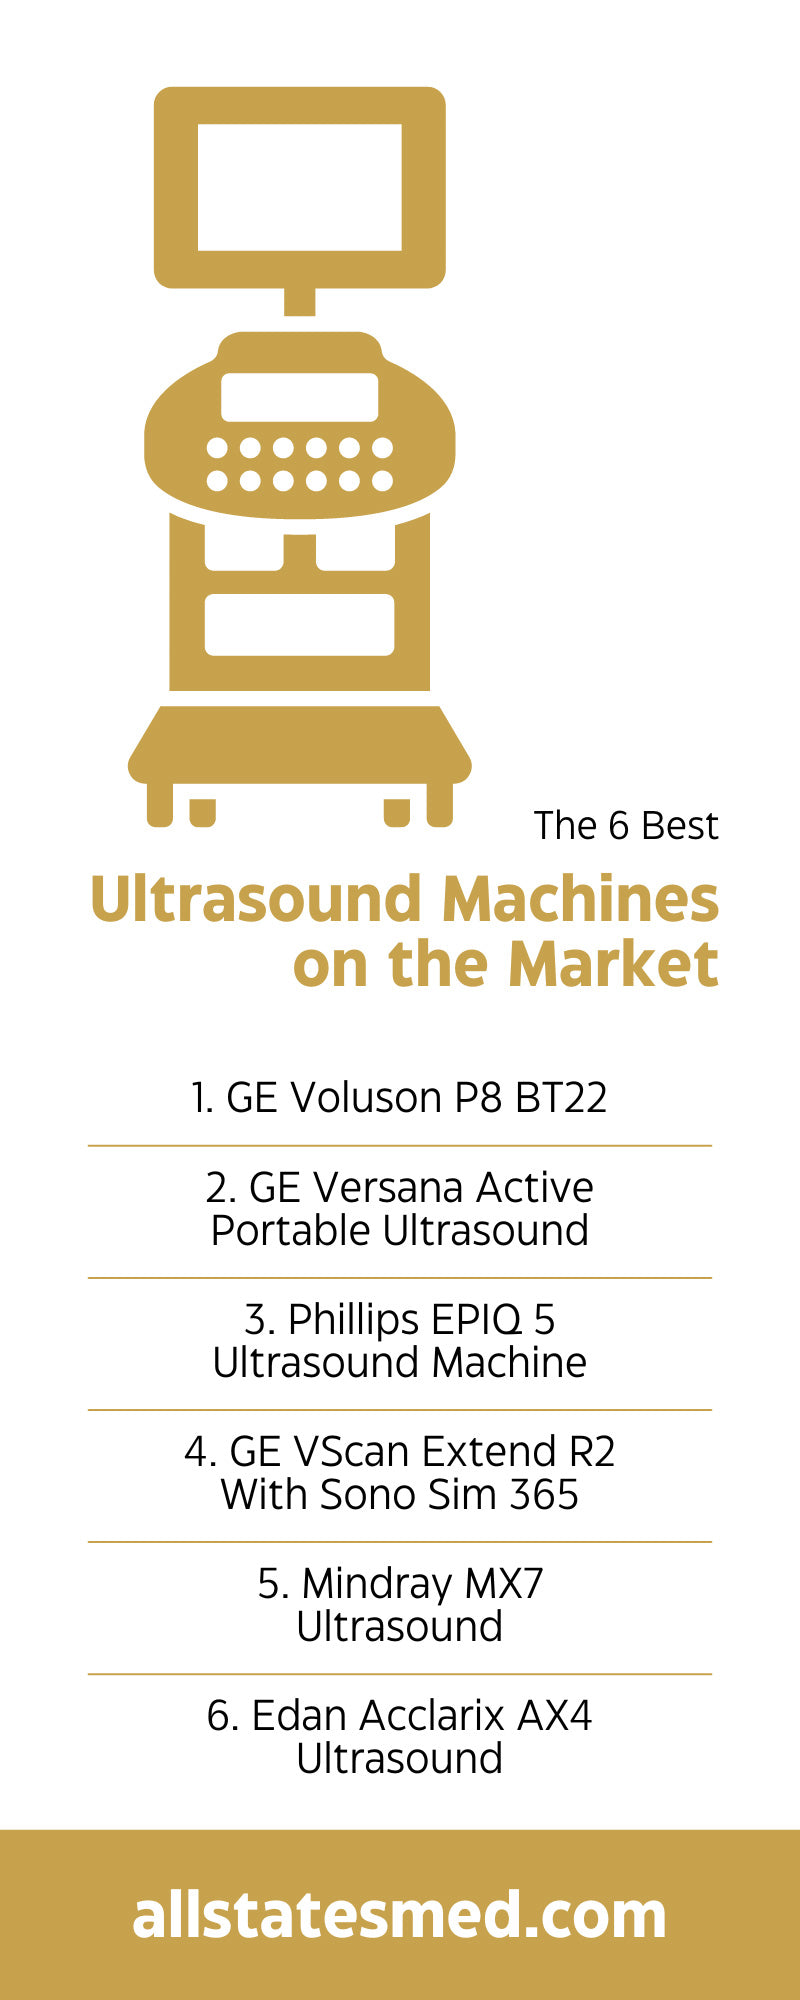 The 6 Best Ultrasound Machines on the Market